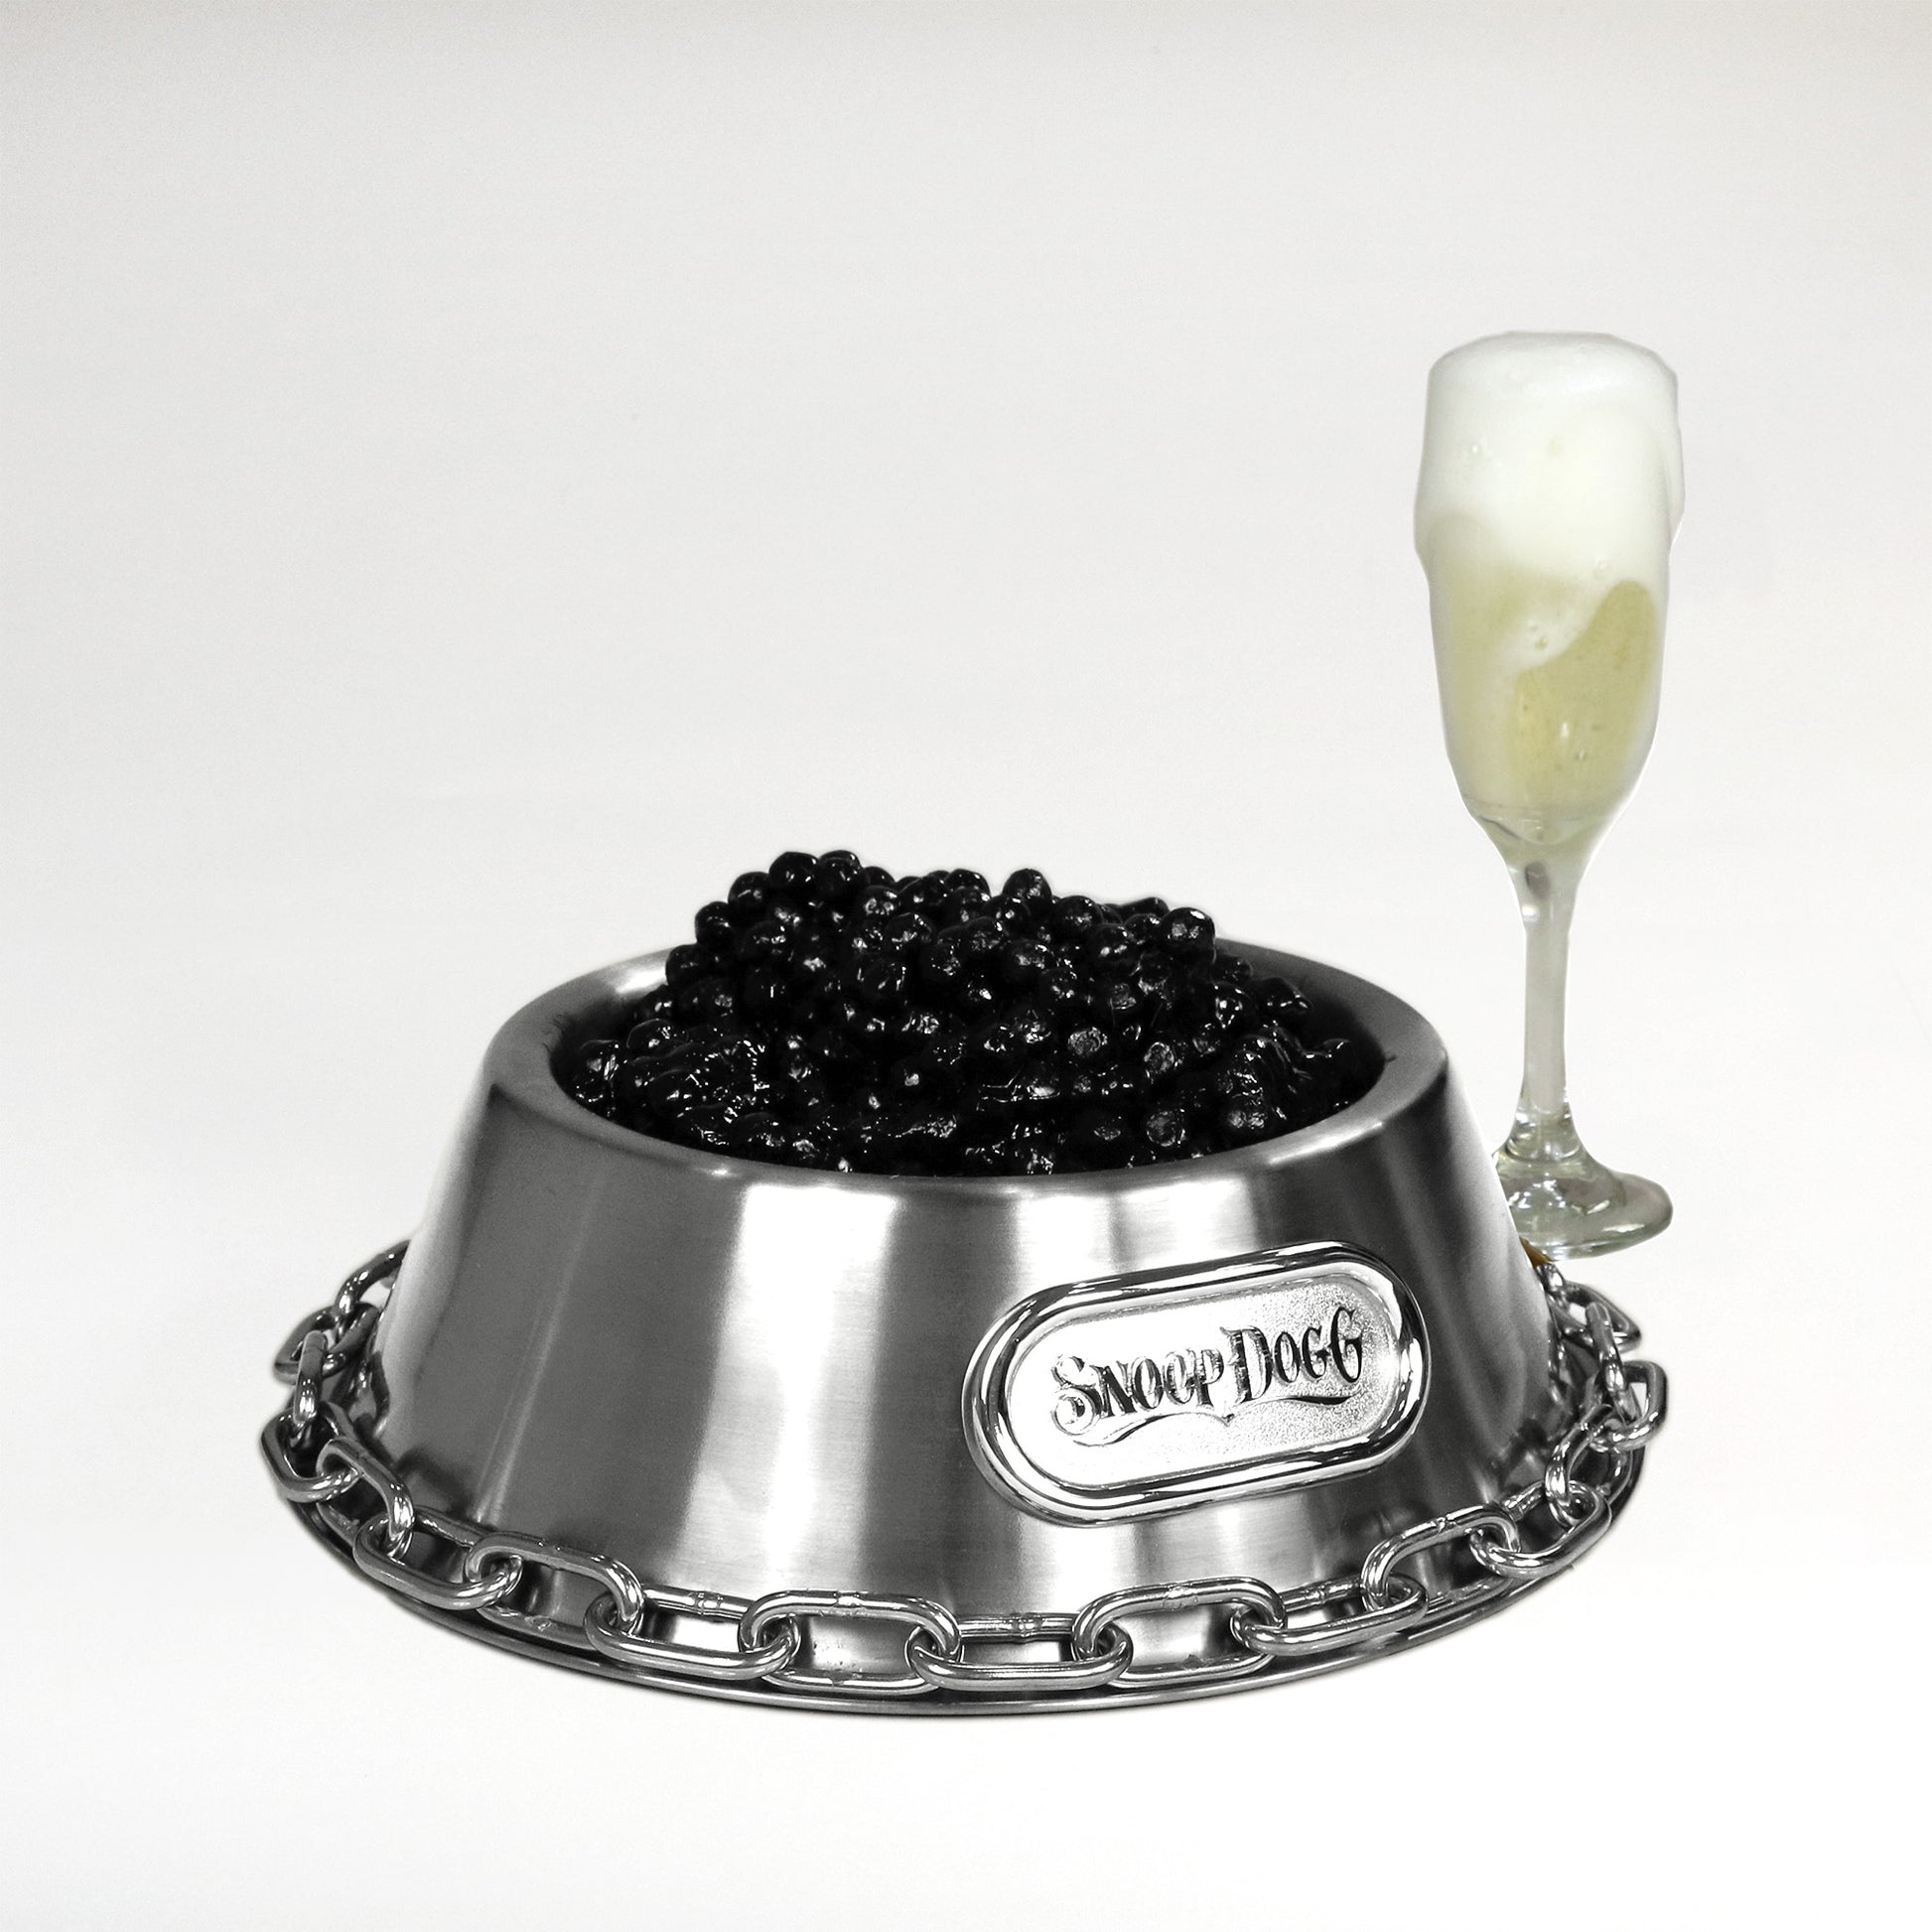 Product flat lay of the Large Deluxe Silver Pet Bowl filled with caviar sitting next to a glass of champagne.